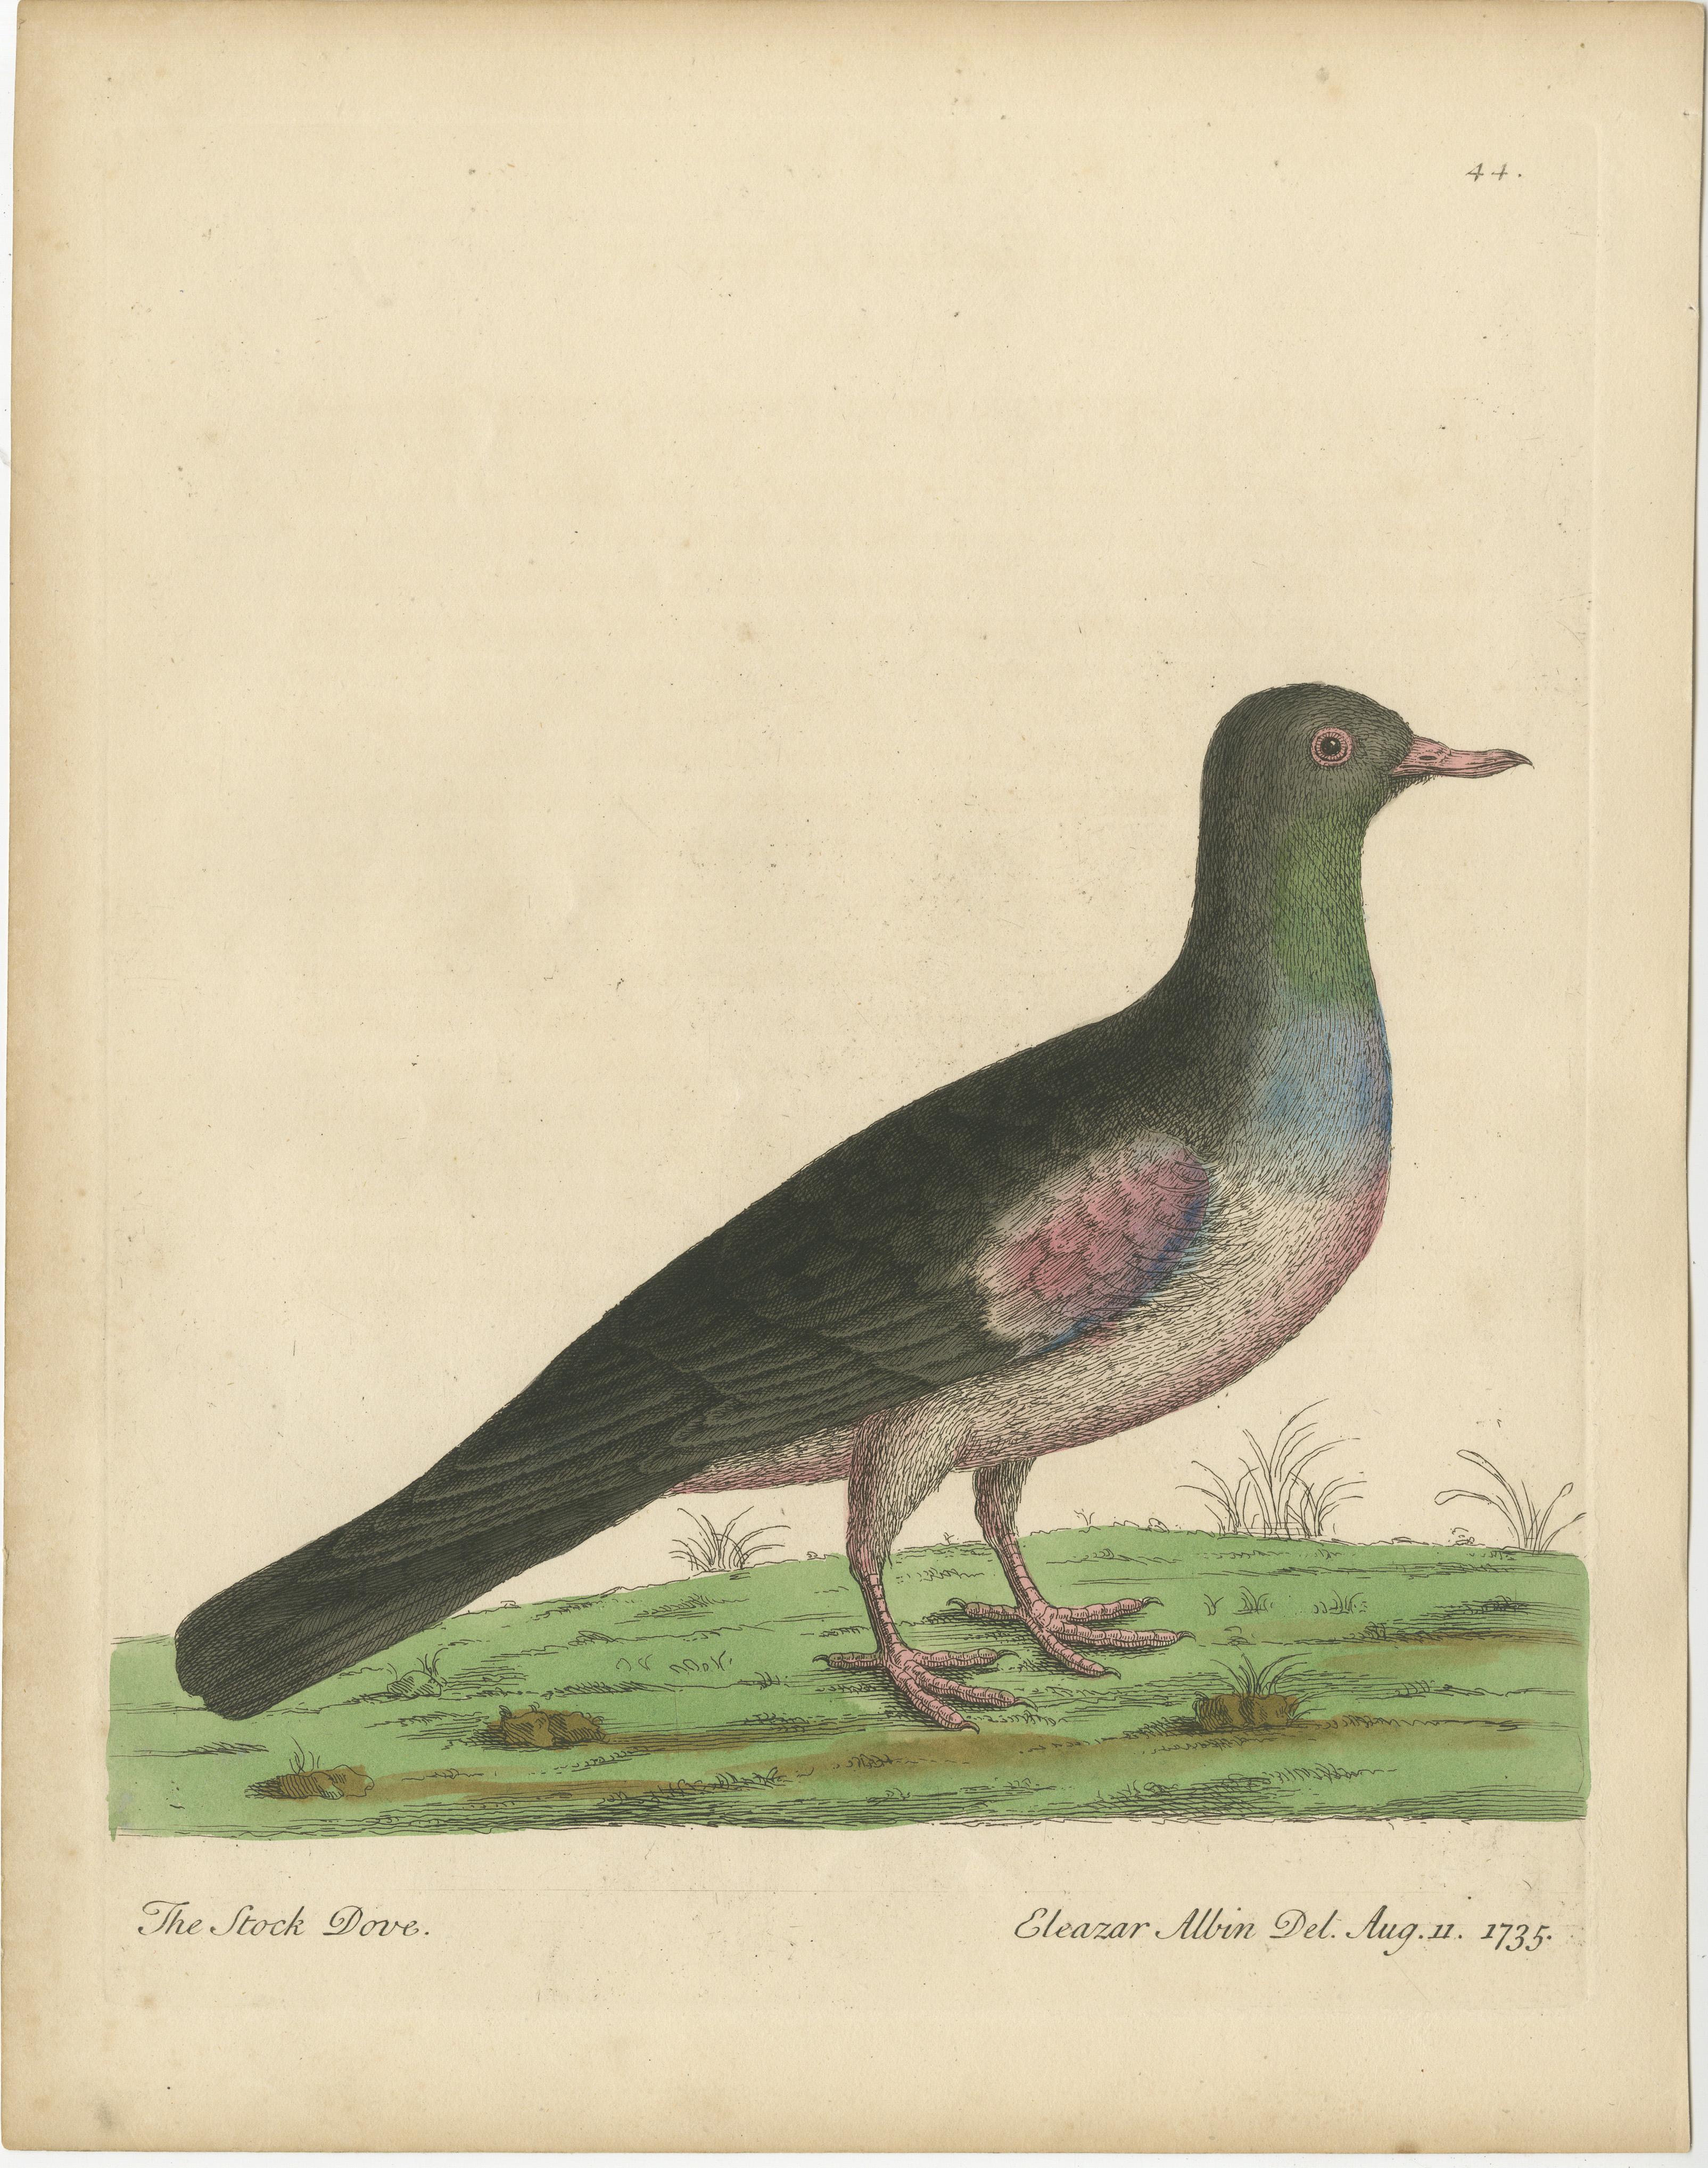 Antique bird print titled 'The Stock Dove'. Original antique print of a stock dove or stock pigeon. This print originates from 'A Supplement to the Natural History of Birds illustrated with an Hundred and One Copper Plates (..)' by Eleazar Albin.